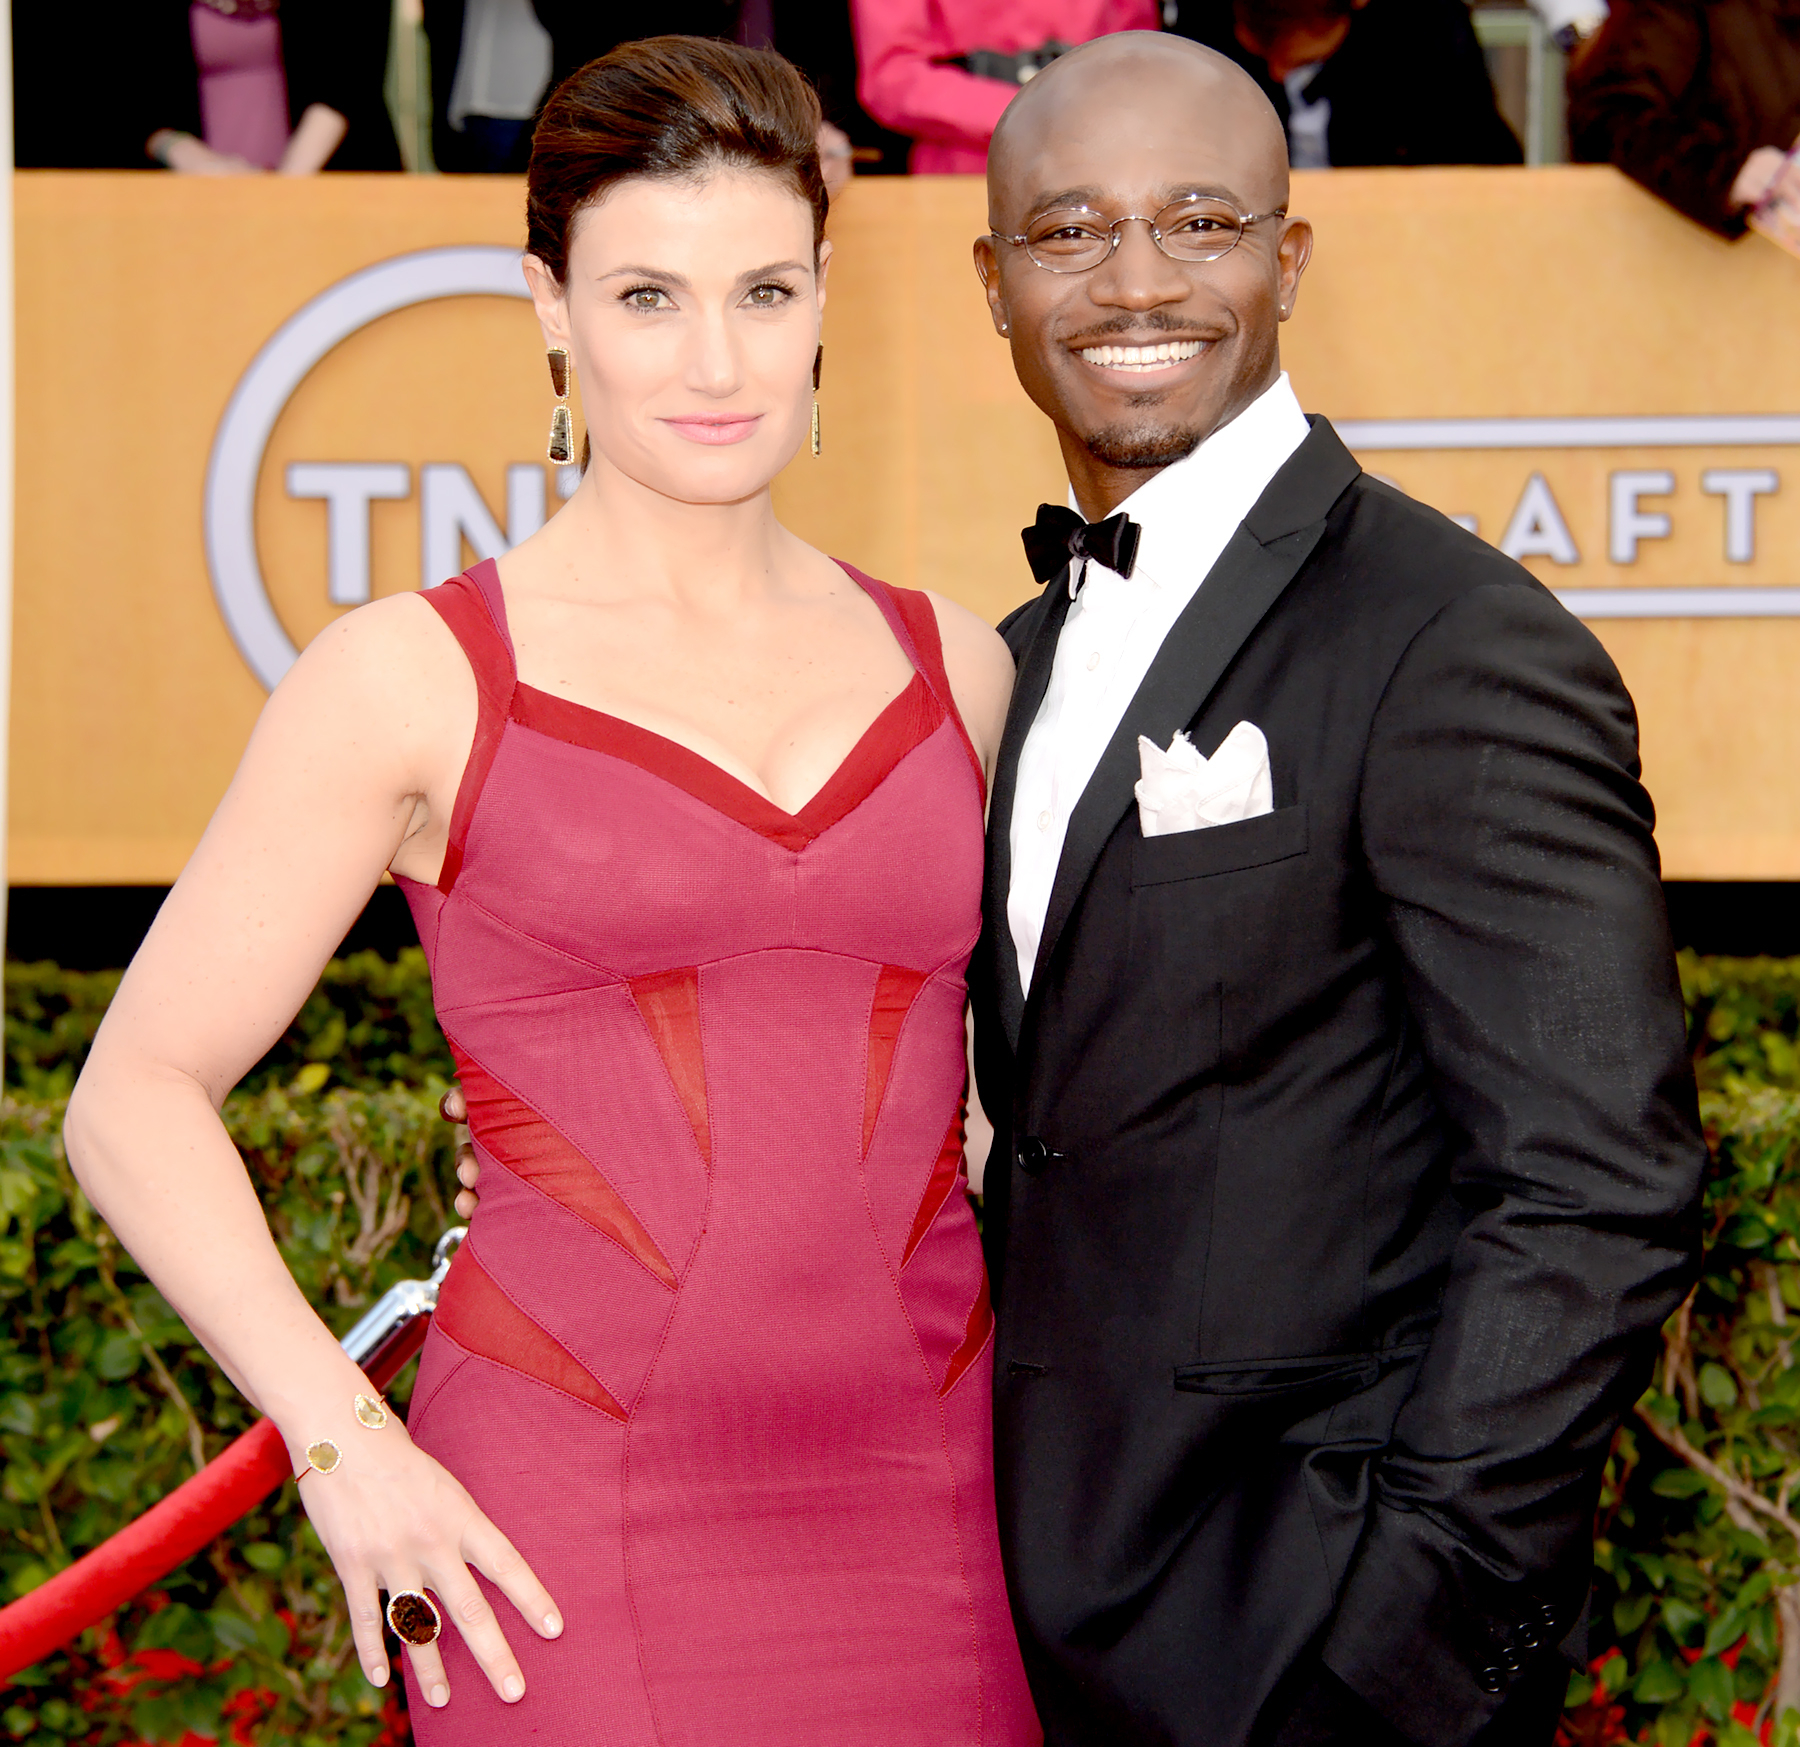 Albums 103+ Images idina menzel taye diggs pictures Latest